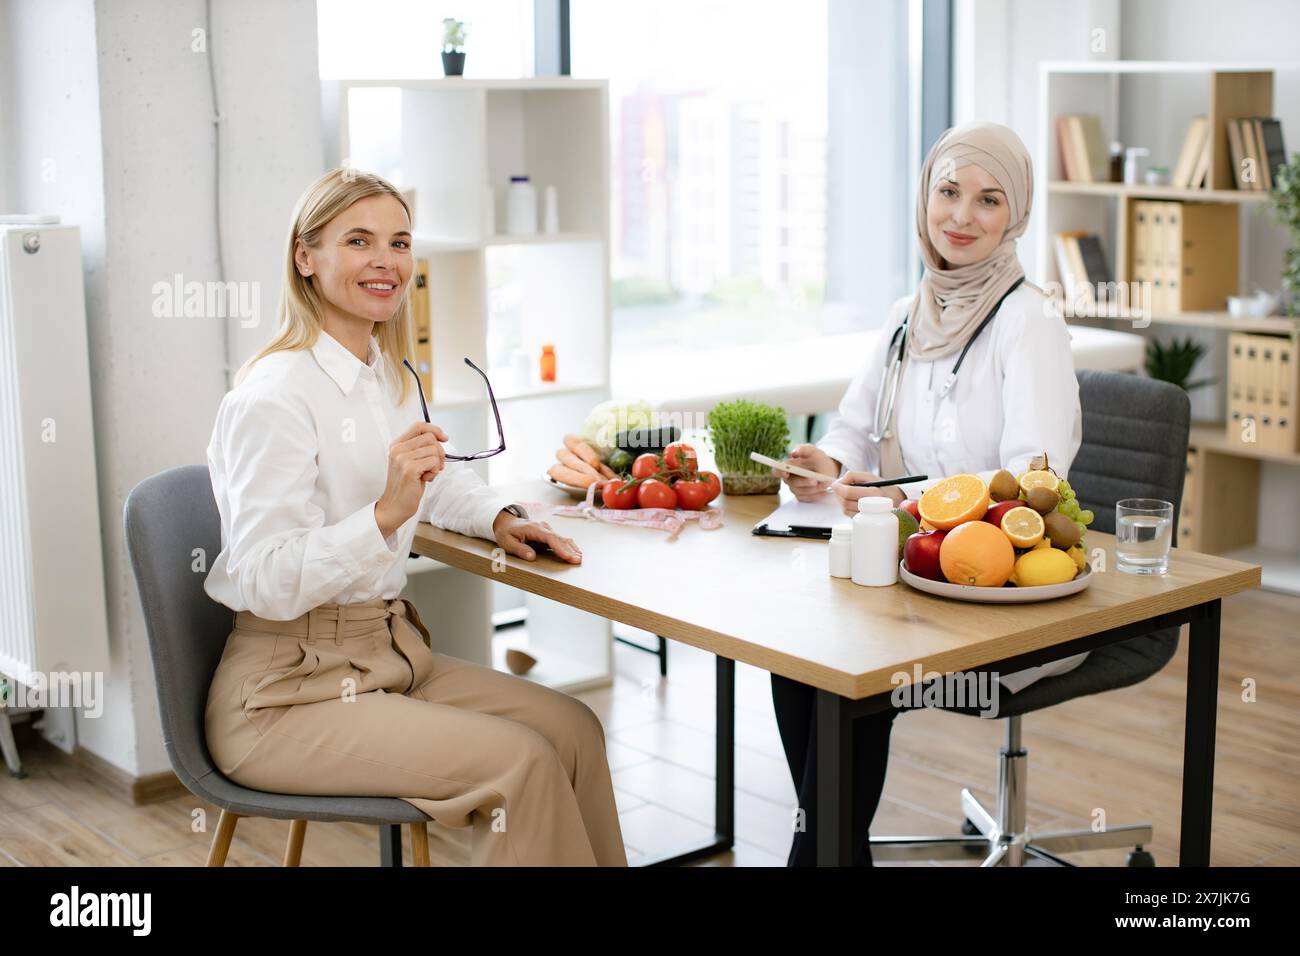 Young Arab female doctor making healthy eating plan. Muslim nutritionist in hijab writes electronic prescription to female patient using phone while s Stock Photo